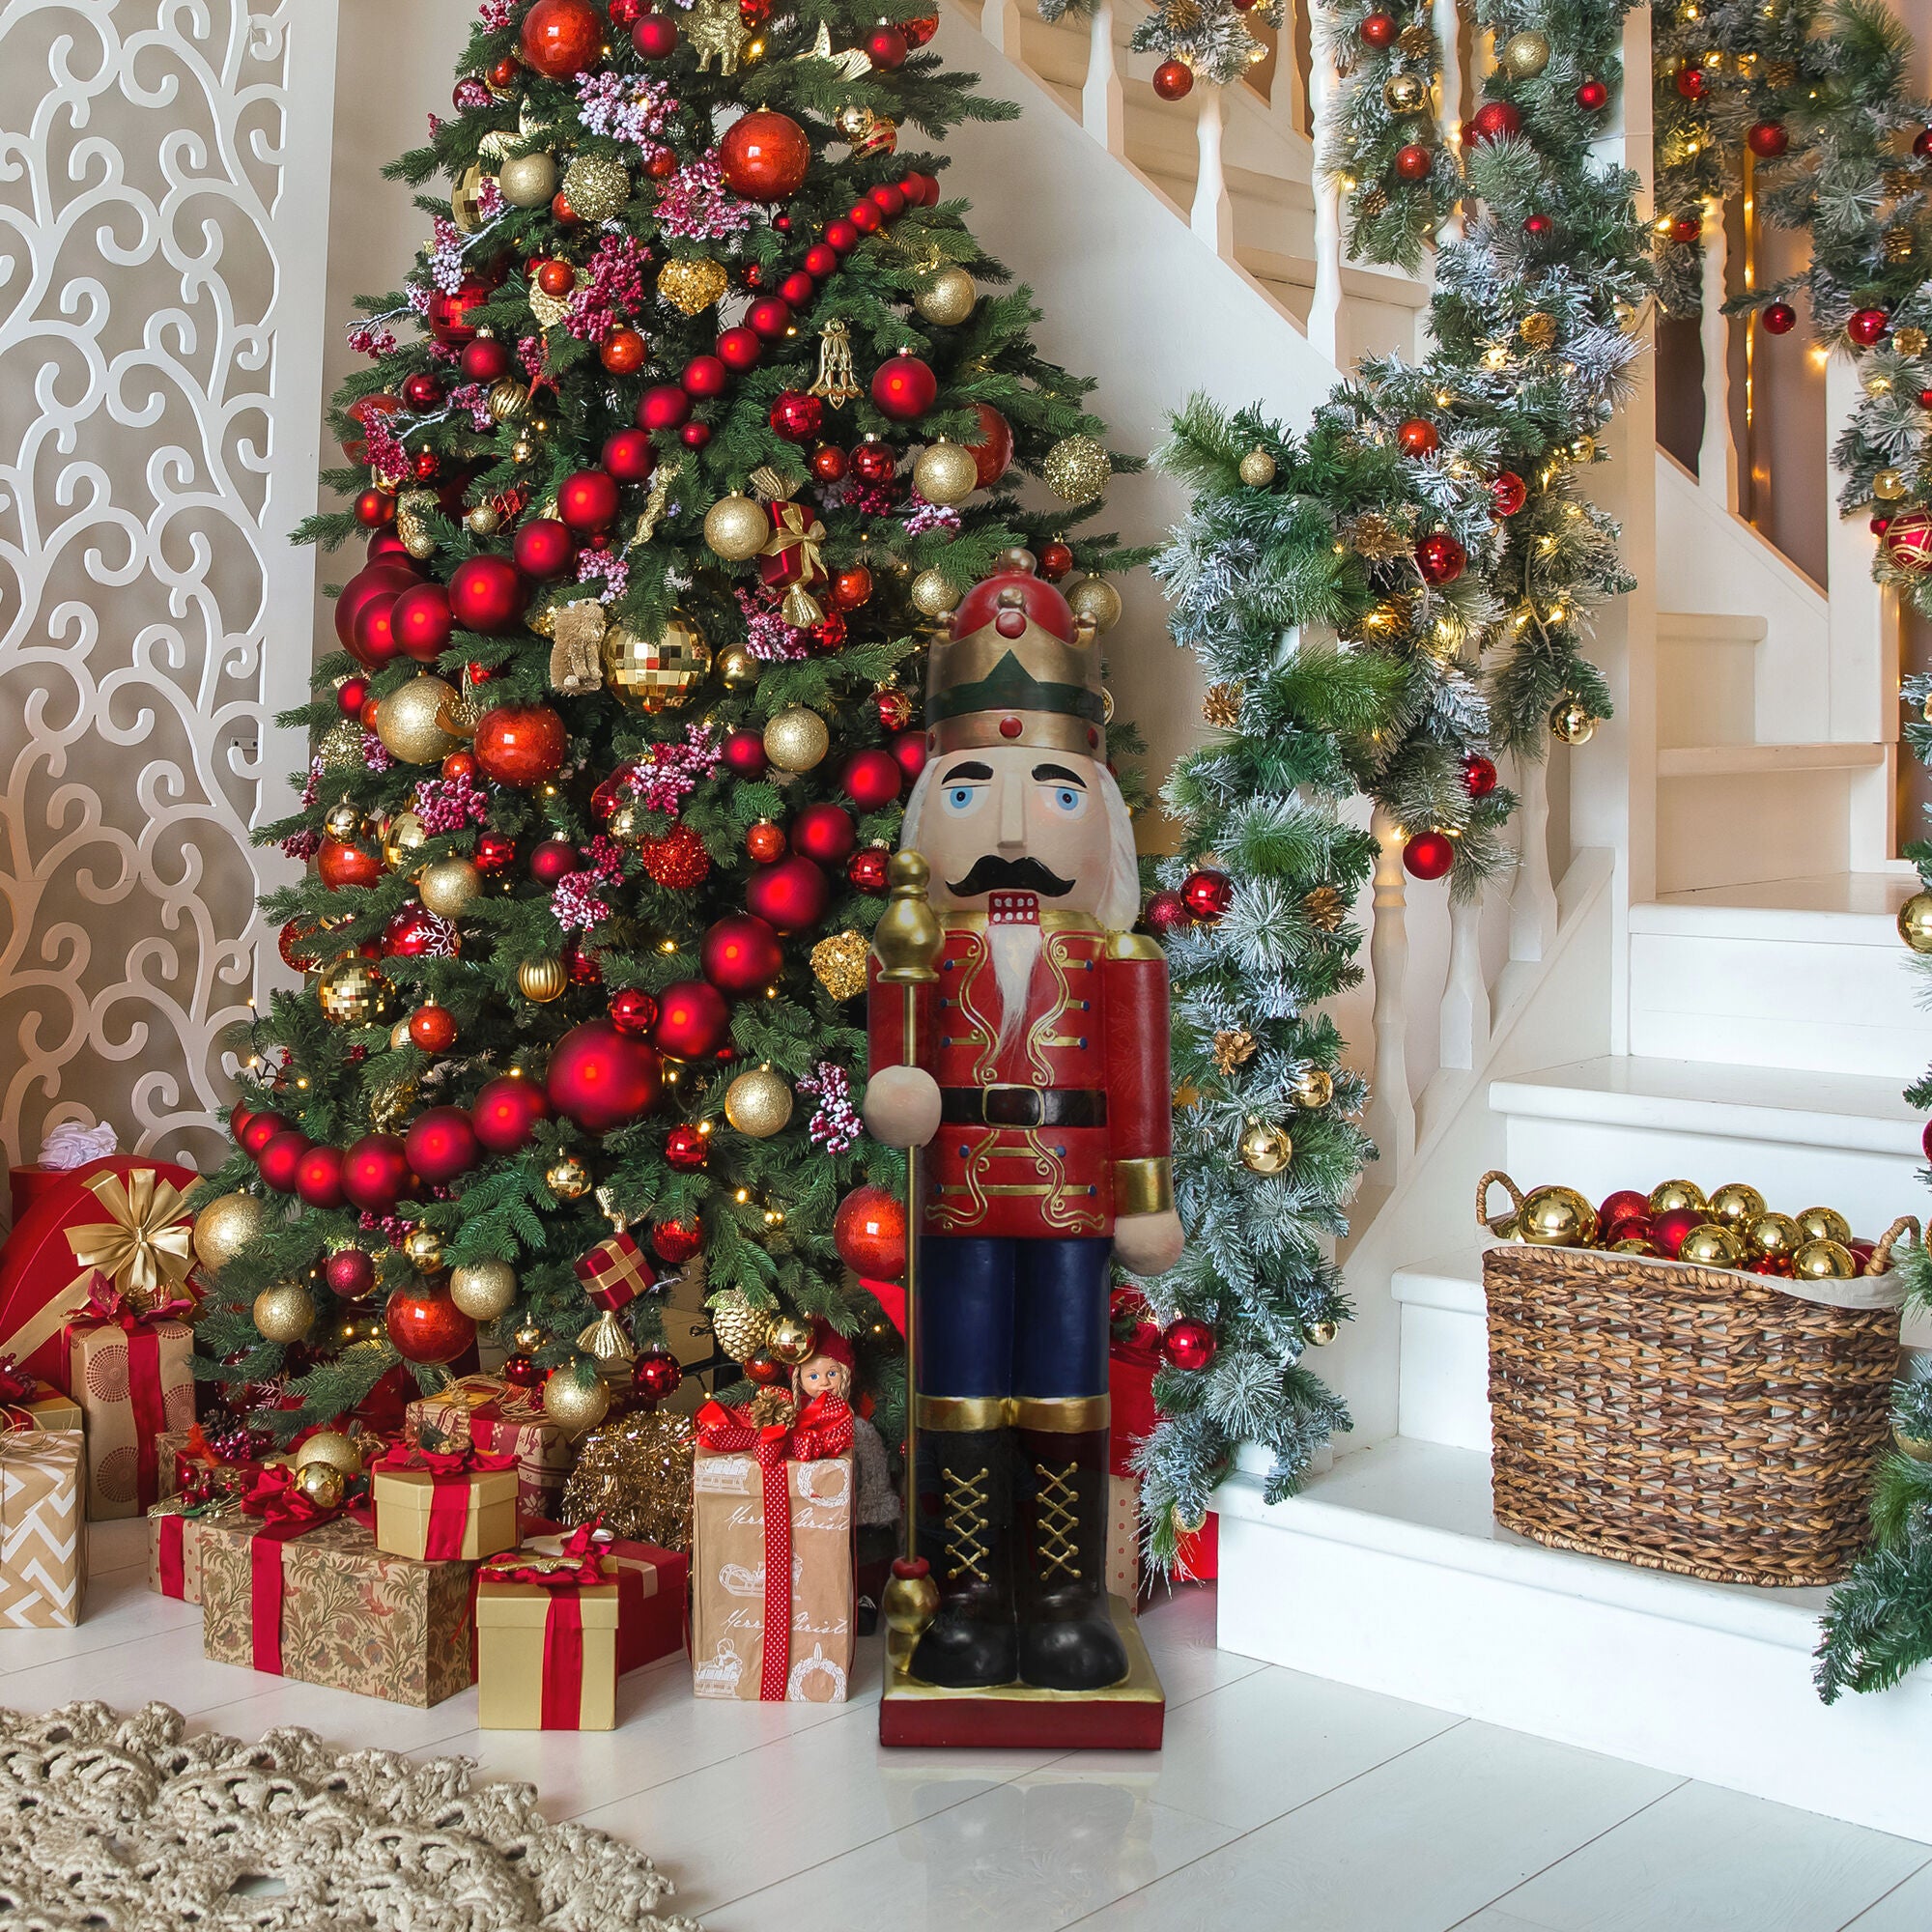 Fraser Hill Farm -  48-In. Nutcracker Holding Staff MGO Figurine, Festive Indoor Christmas Holiday Decorations, Red/Blue